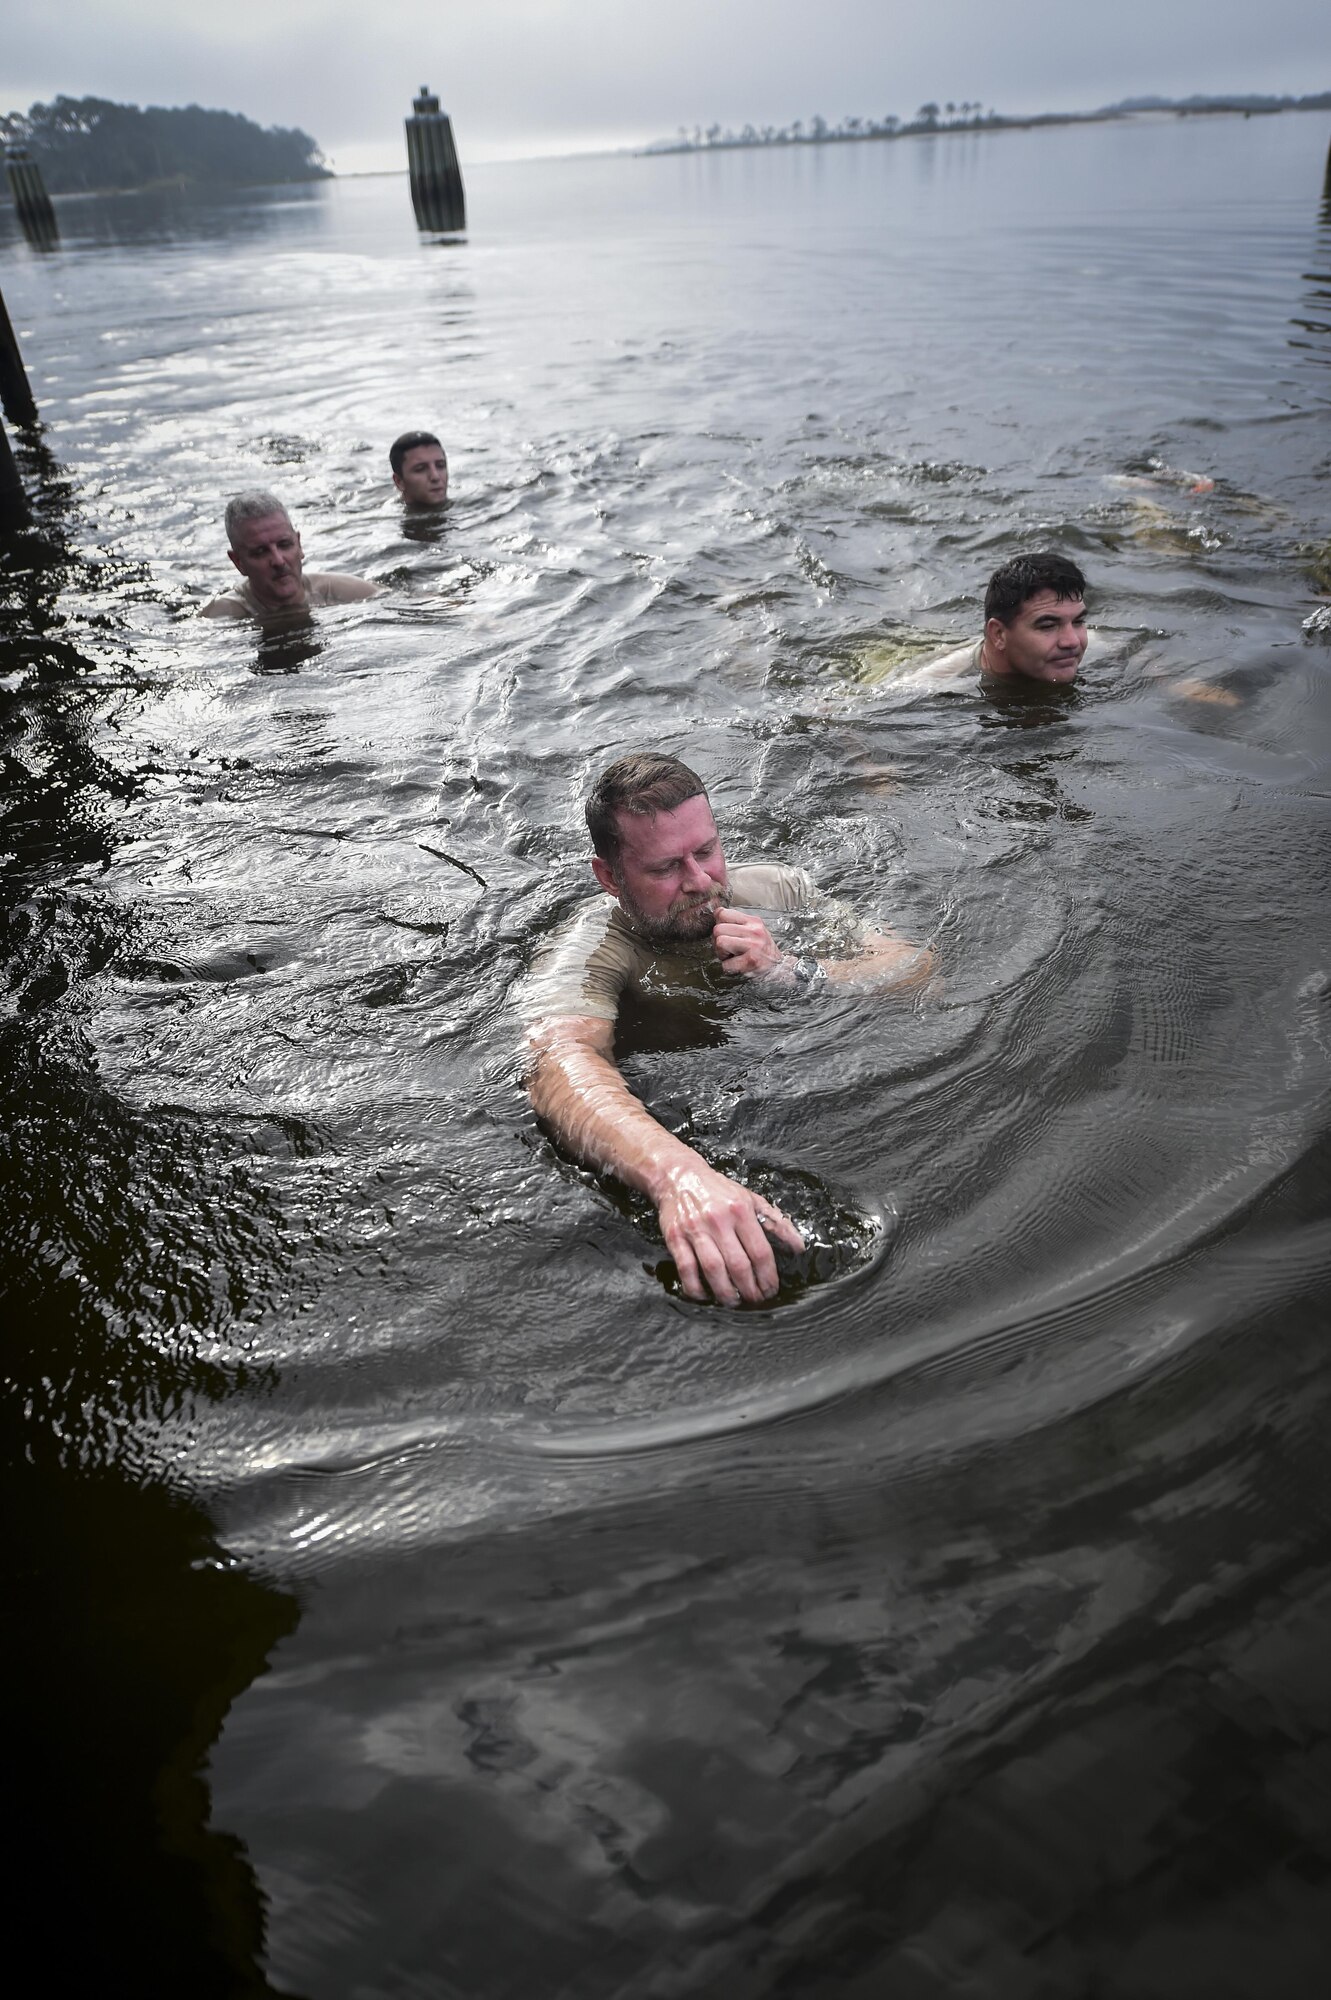 Monster Mash Team 4 completes the swimming portion of a Monster Mash at Hurlburt Field, May 12, 2016. Monster Mash is a long-standing Special Tactics training tradition, consisting of an obstacle course where special operators complete timed scenarios at different stations of core mission training. The event was held in honor of Chief Master Sgt. Bruce W. Dixon, the command chief of the 24th Special Operations Wing, who is retiring after a 30-year career as a combat controller. (U.S. Air Force photo by Senior Airman Ryan Conroy) 